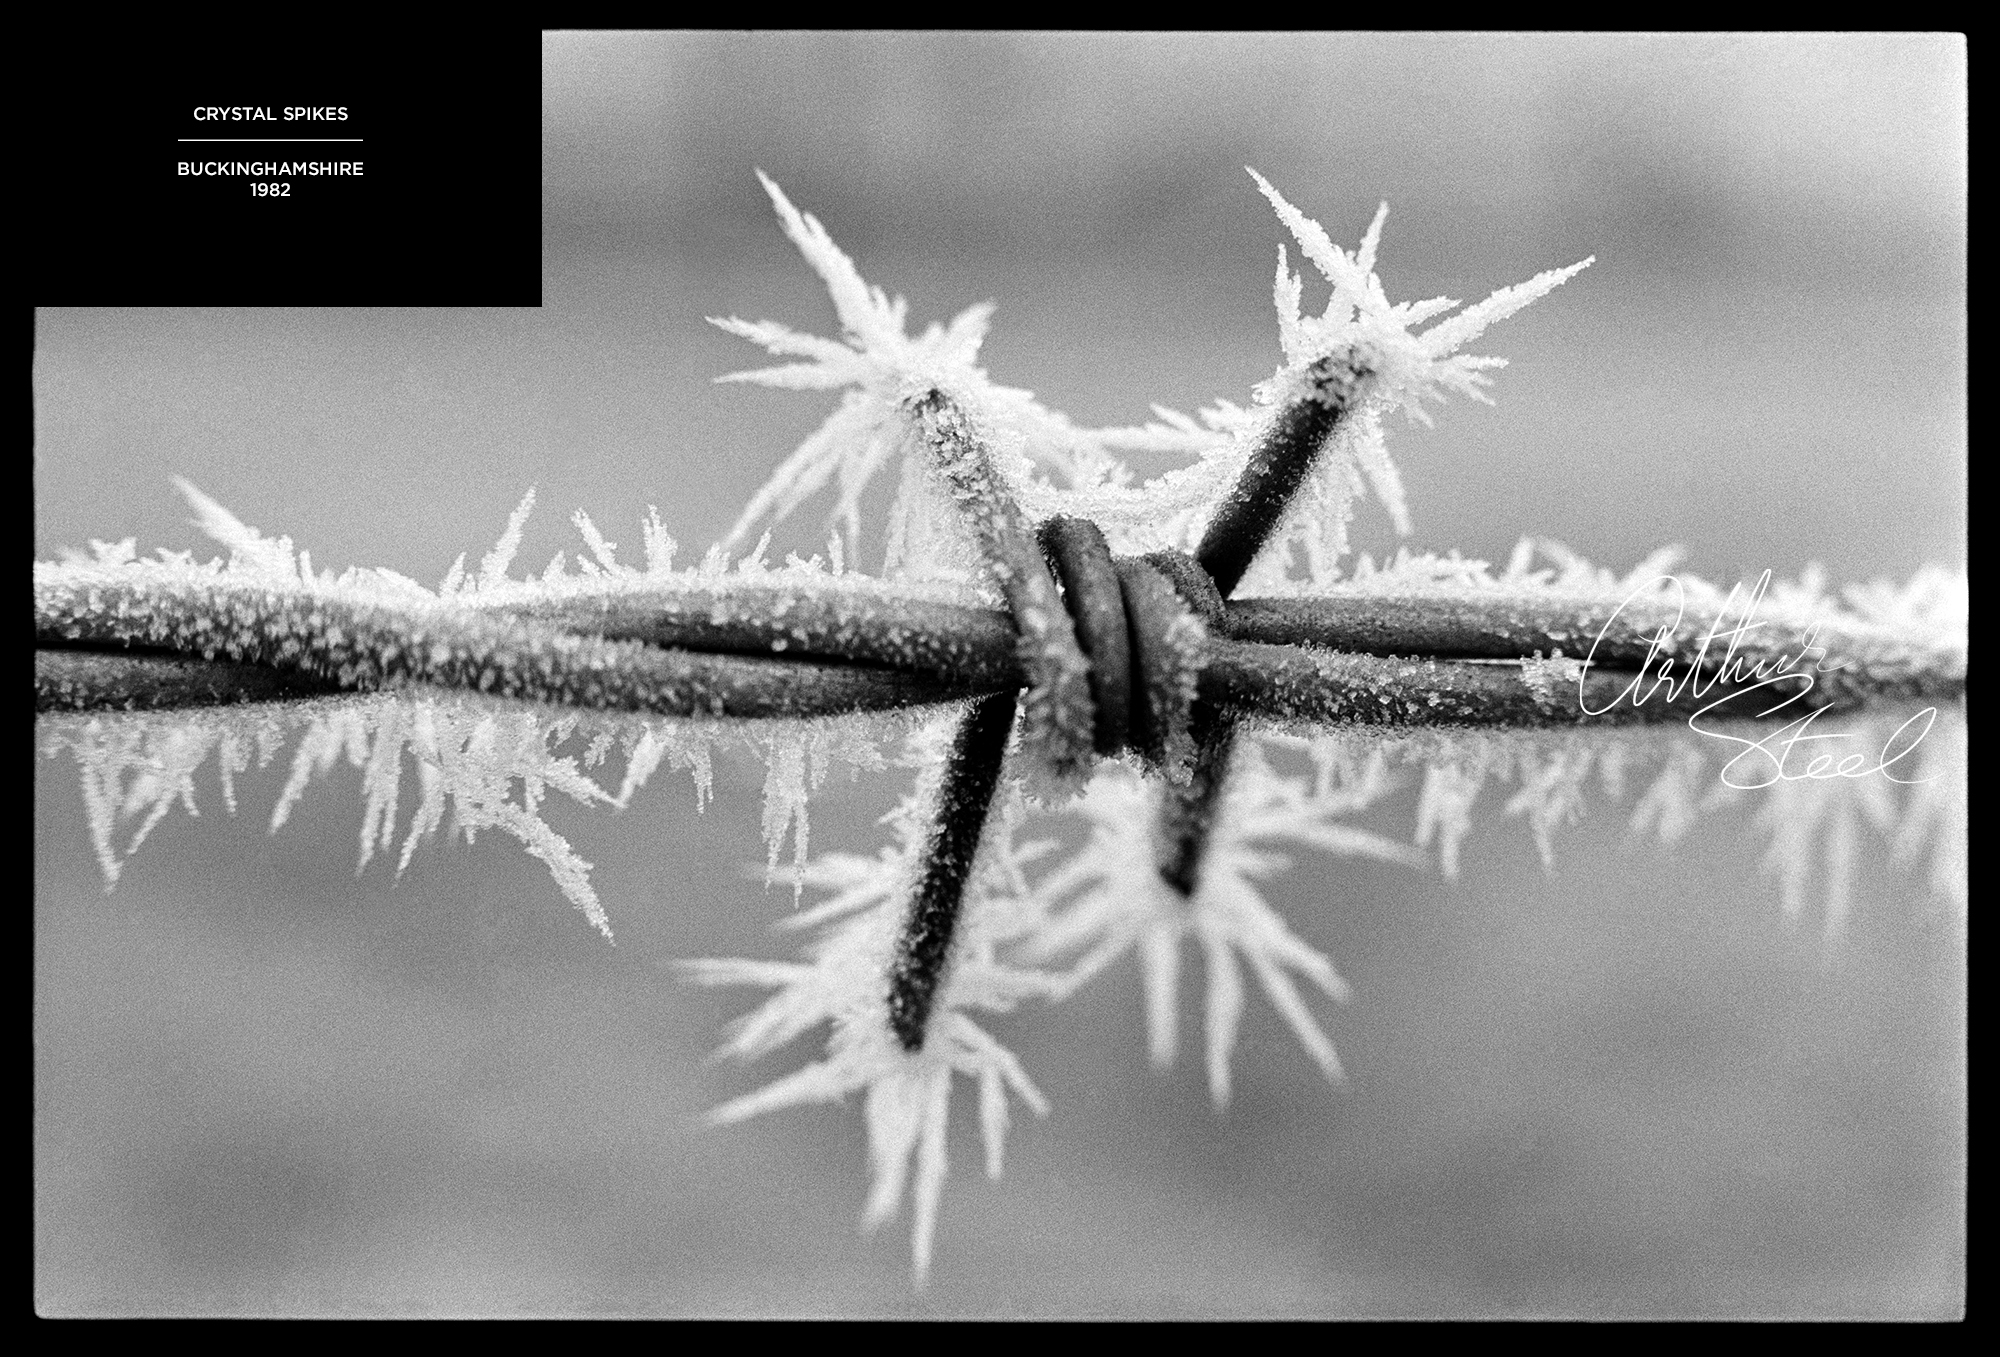 crystal-spikes-barbed-wire-still-life-by-photographer-arthur-steel